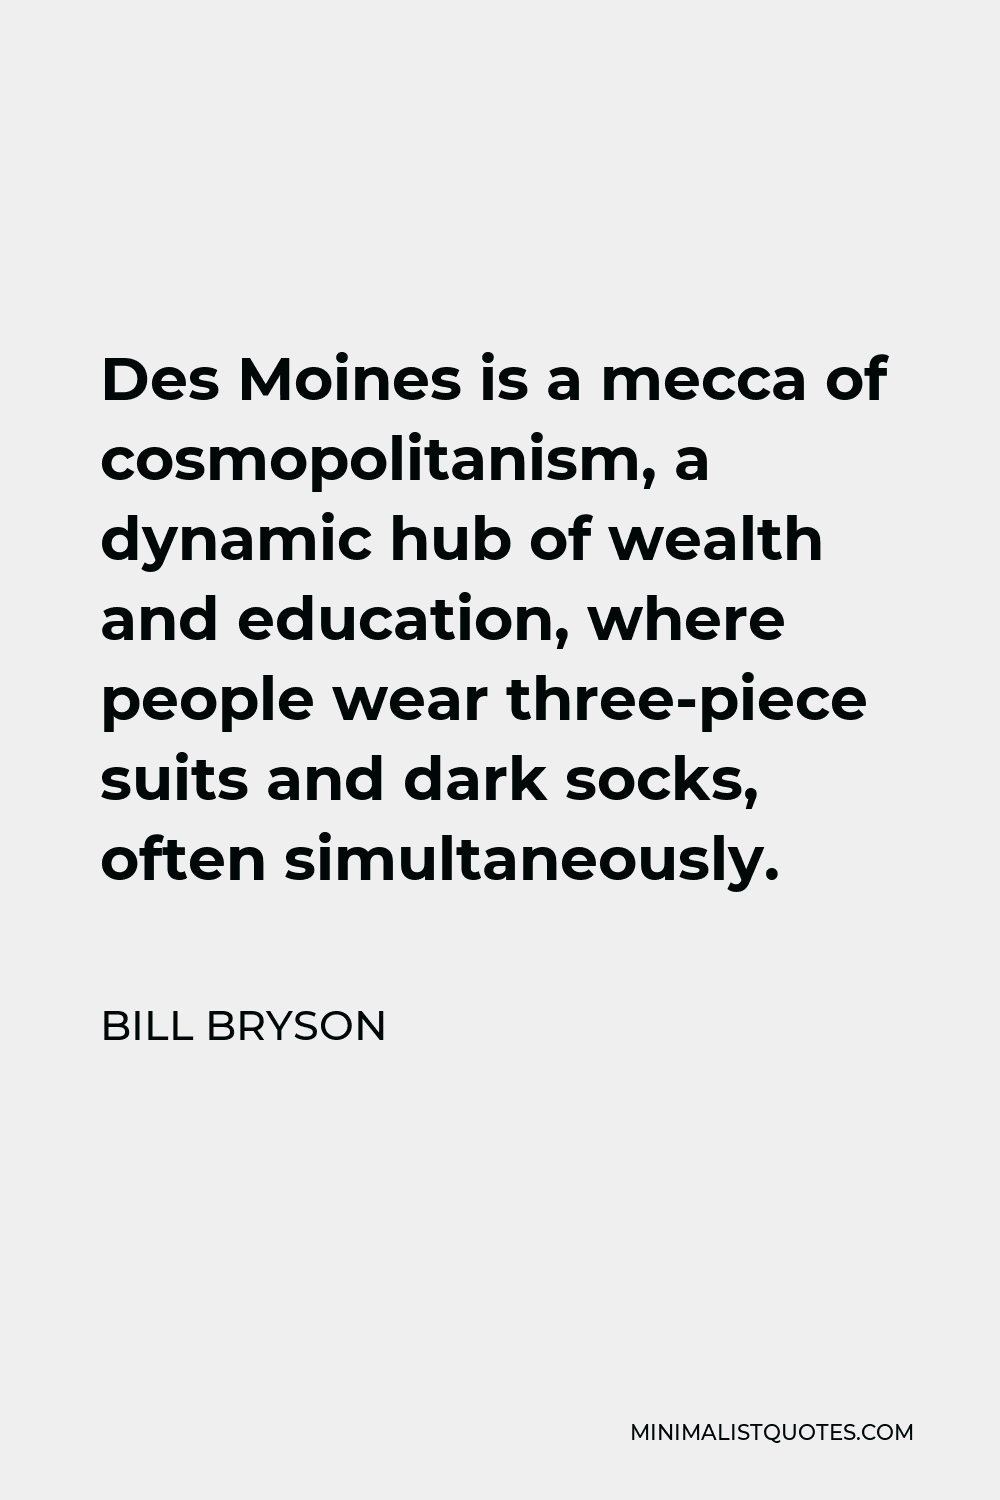 Bill Bryson Quote - Des Moines is a mecca of cosmopolitanism, a dynamic hub of wealth and education, where people wear three-piece suits and dark socks, often simultaneously.